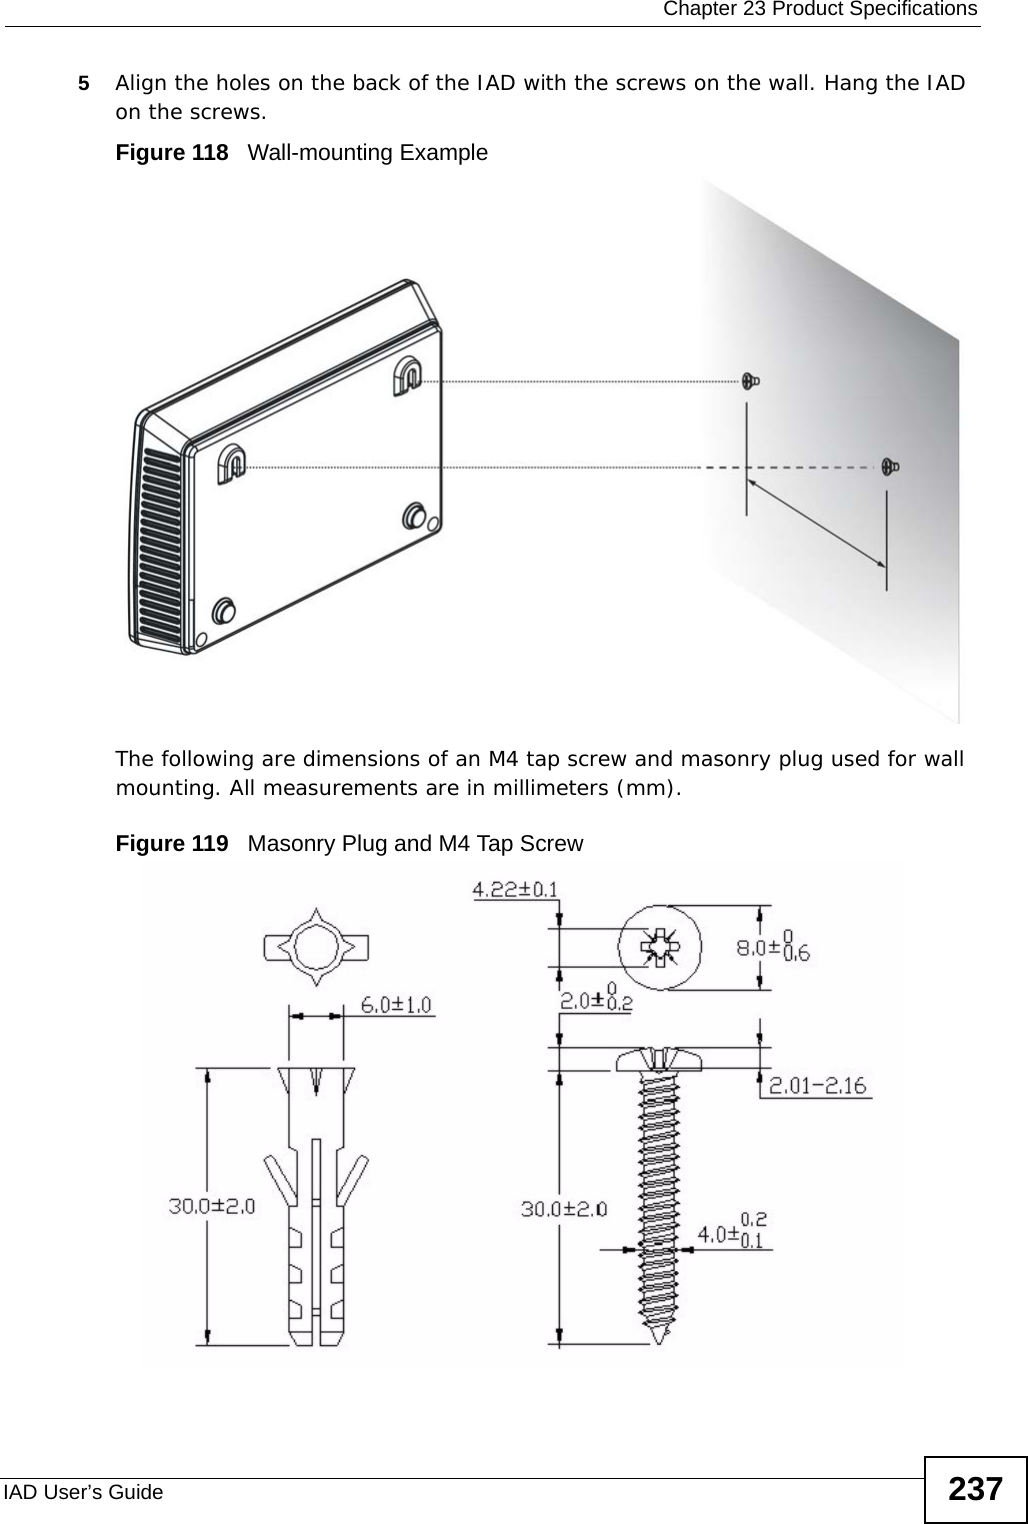  Chapter 23 Product SpecificationsIAD User’s Guide 2375Align the holes on the back of the IAD with the screws on the wall. Hang the IAD on the screws.Figure 118   Wall-mounting ExampleThe following are dimensions of an M4 tap screw and masonry plug used for wall mounting. All measurements are in millimeters (mm). Figure 119   Masonry Plug and M4 Tap Screw